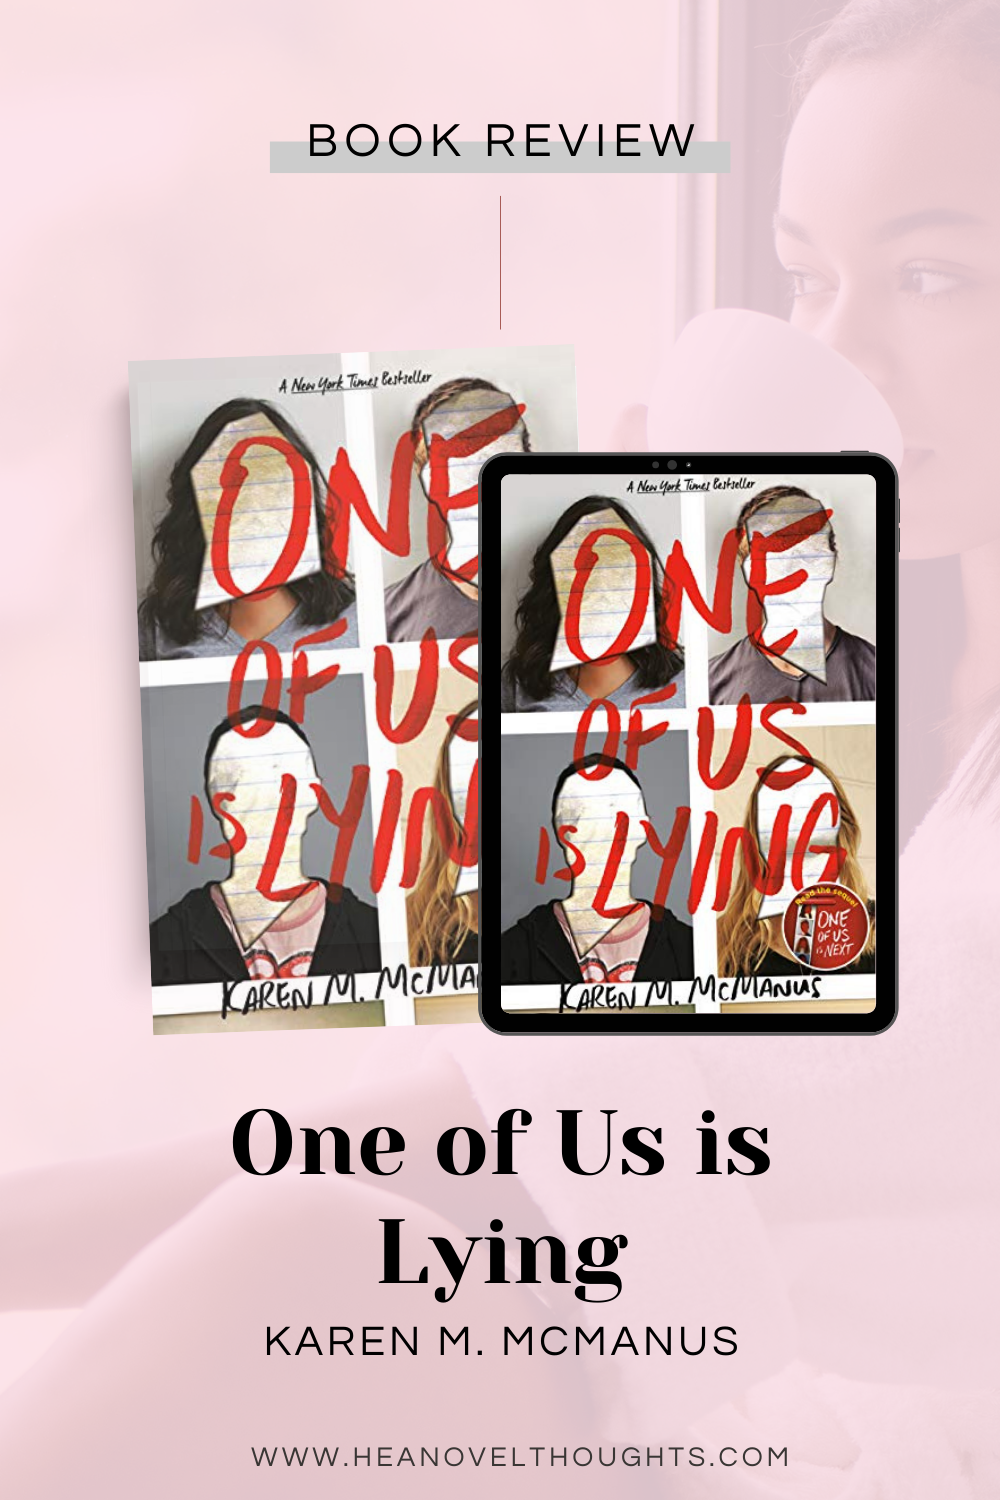 sequel to one of us is lying